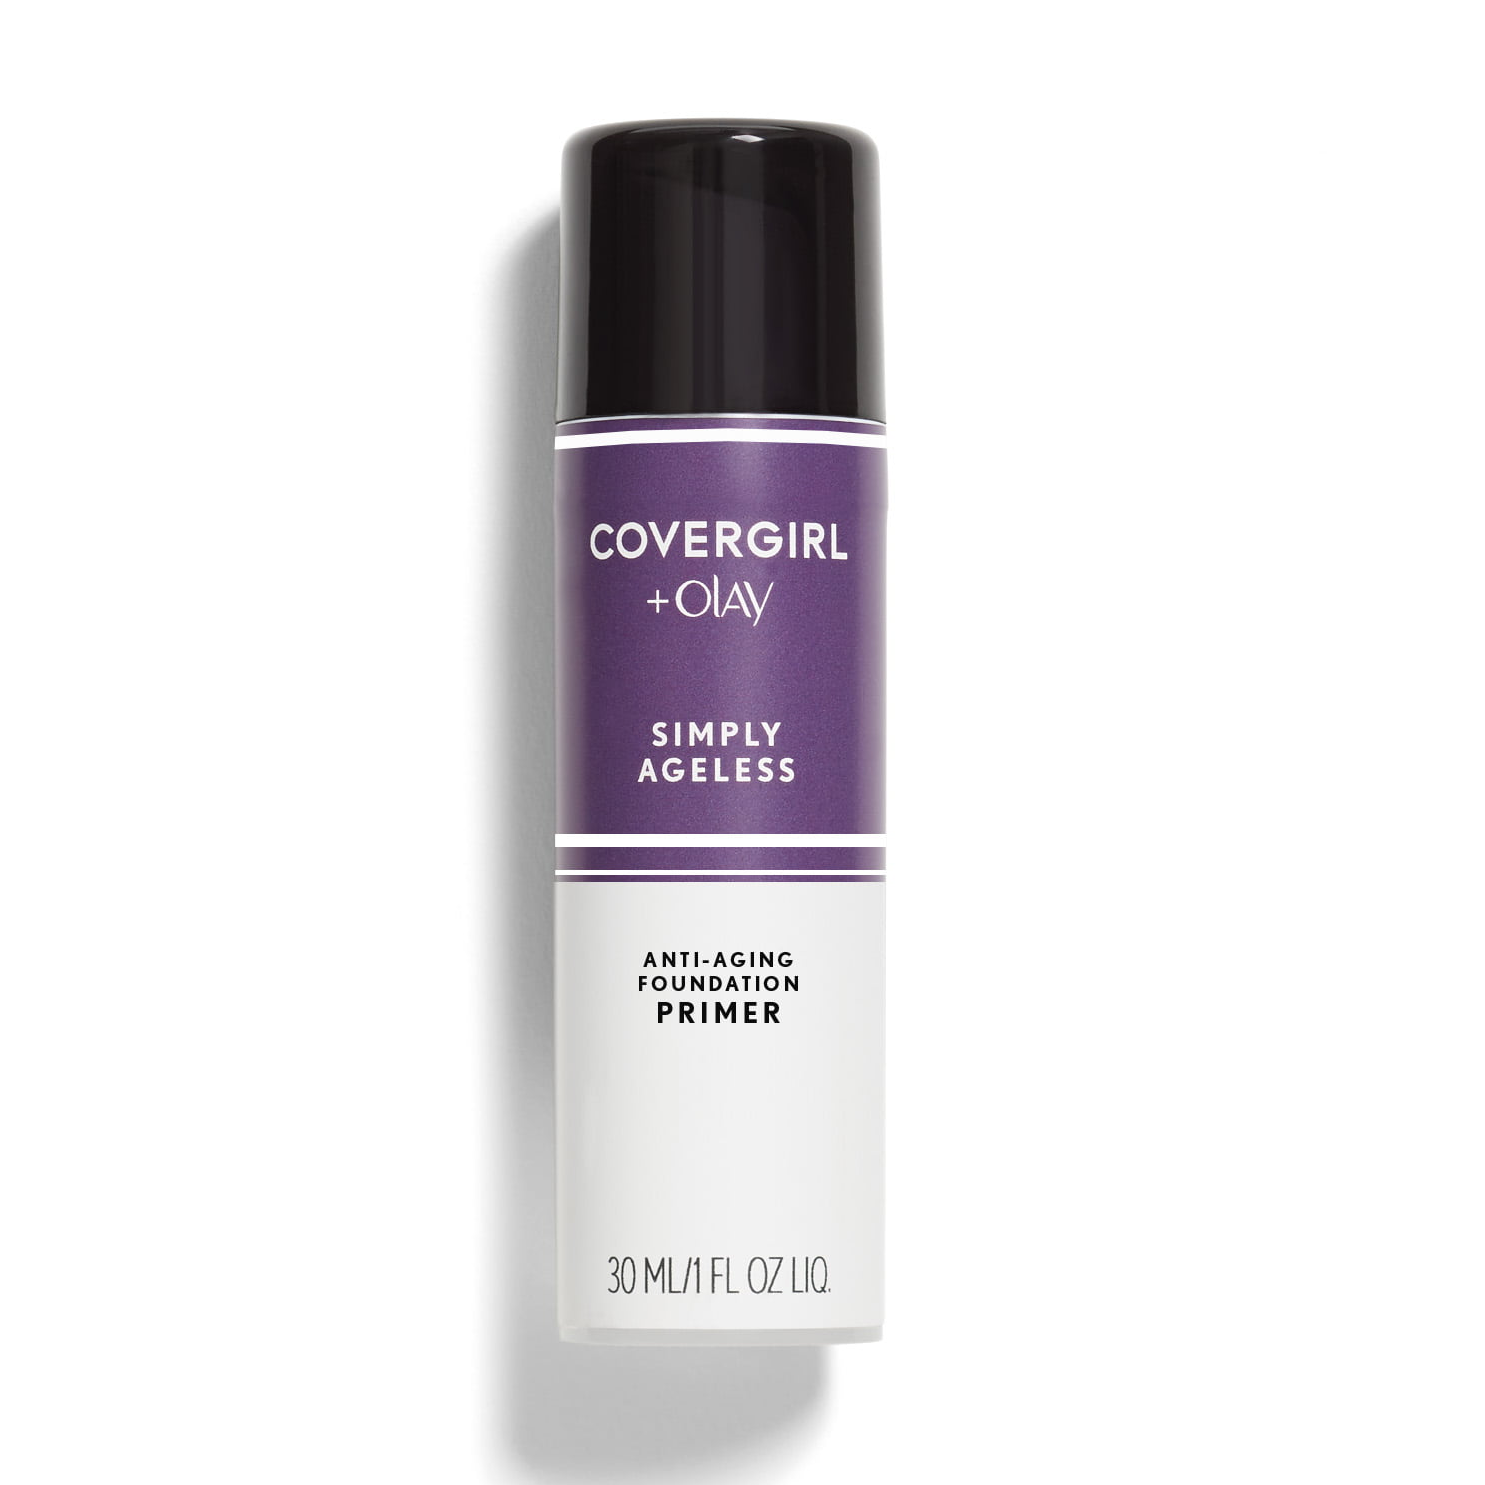 COVERGIRL + Olay Simply Ageless Anti-Aging Primer, 1 Fl Oz, Hydrating Primer, Anti-Aging Primer, Cruelty Free Primer, Reduces Wrinkles, Improves Skin Tone - image 1 of 9